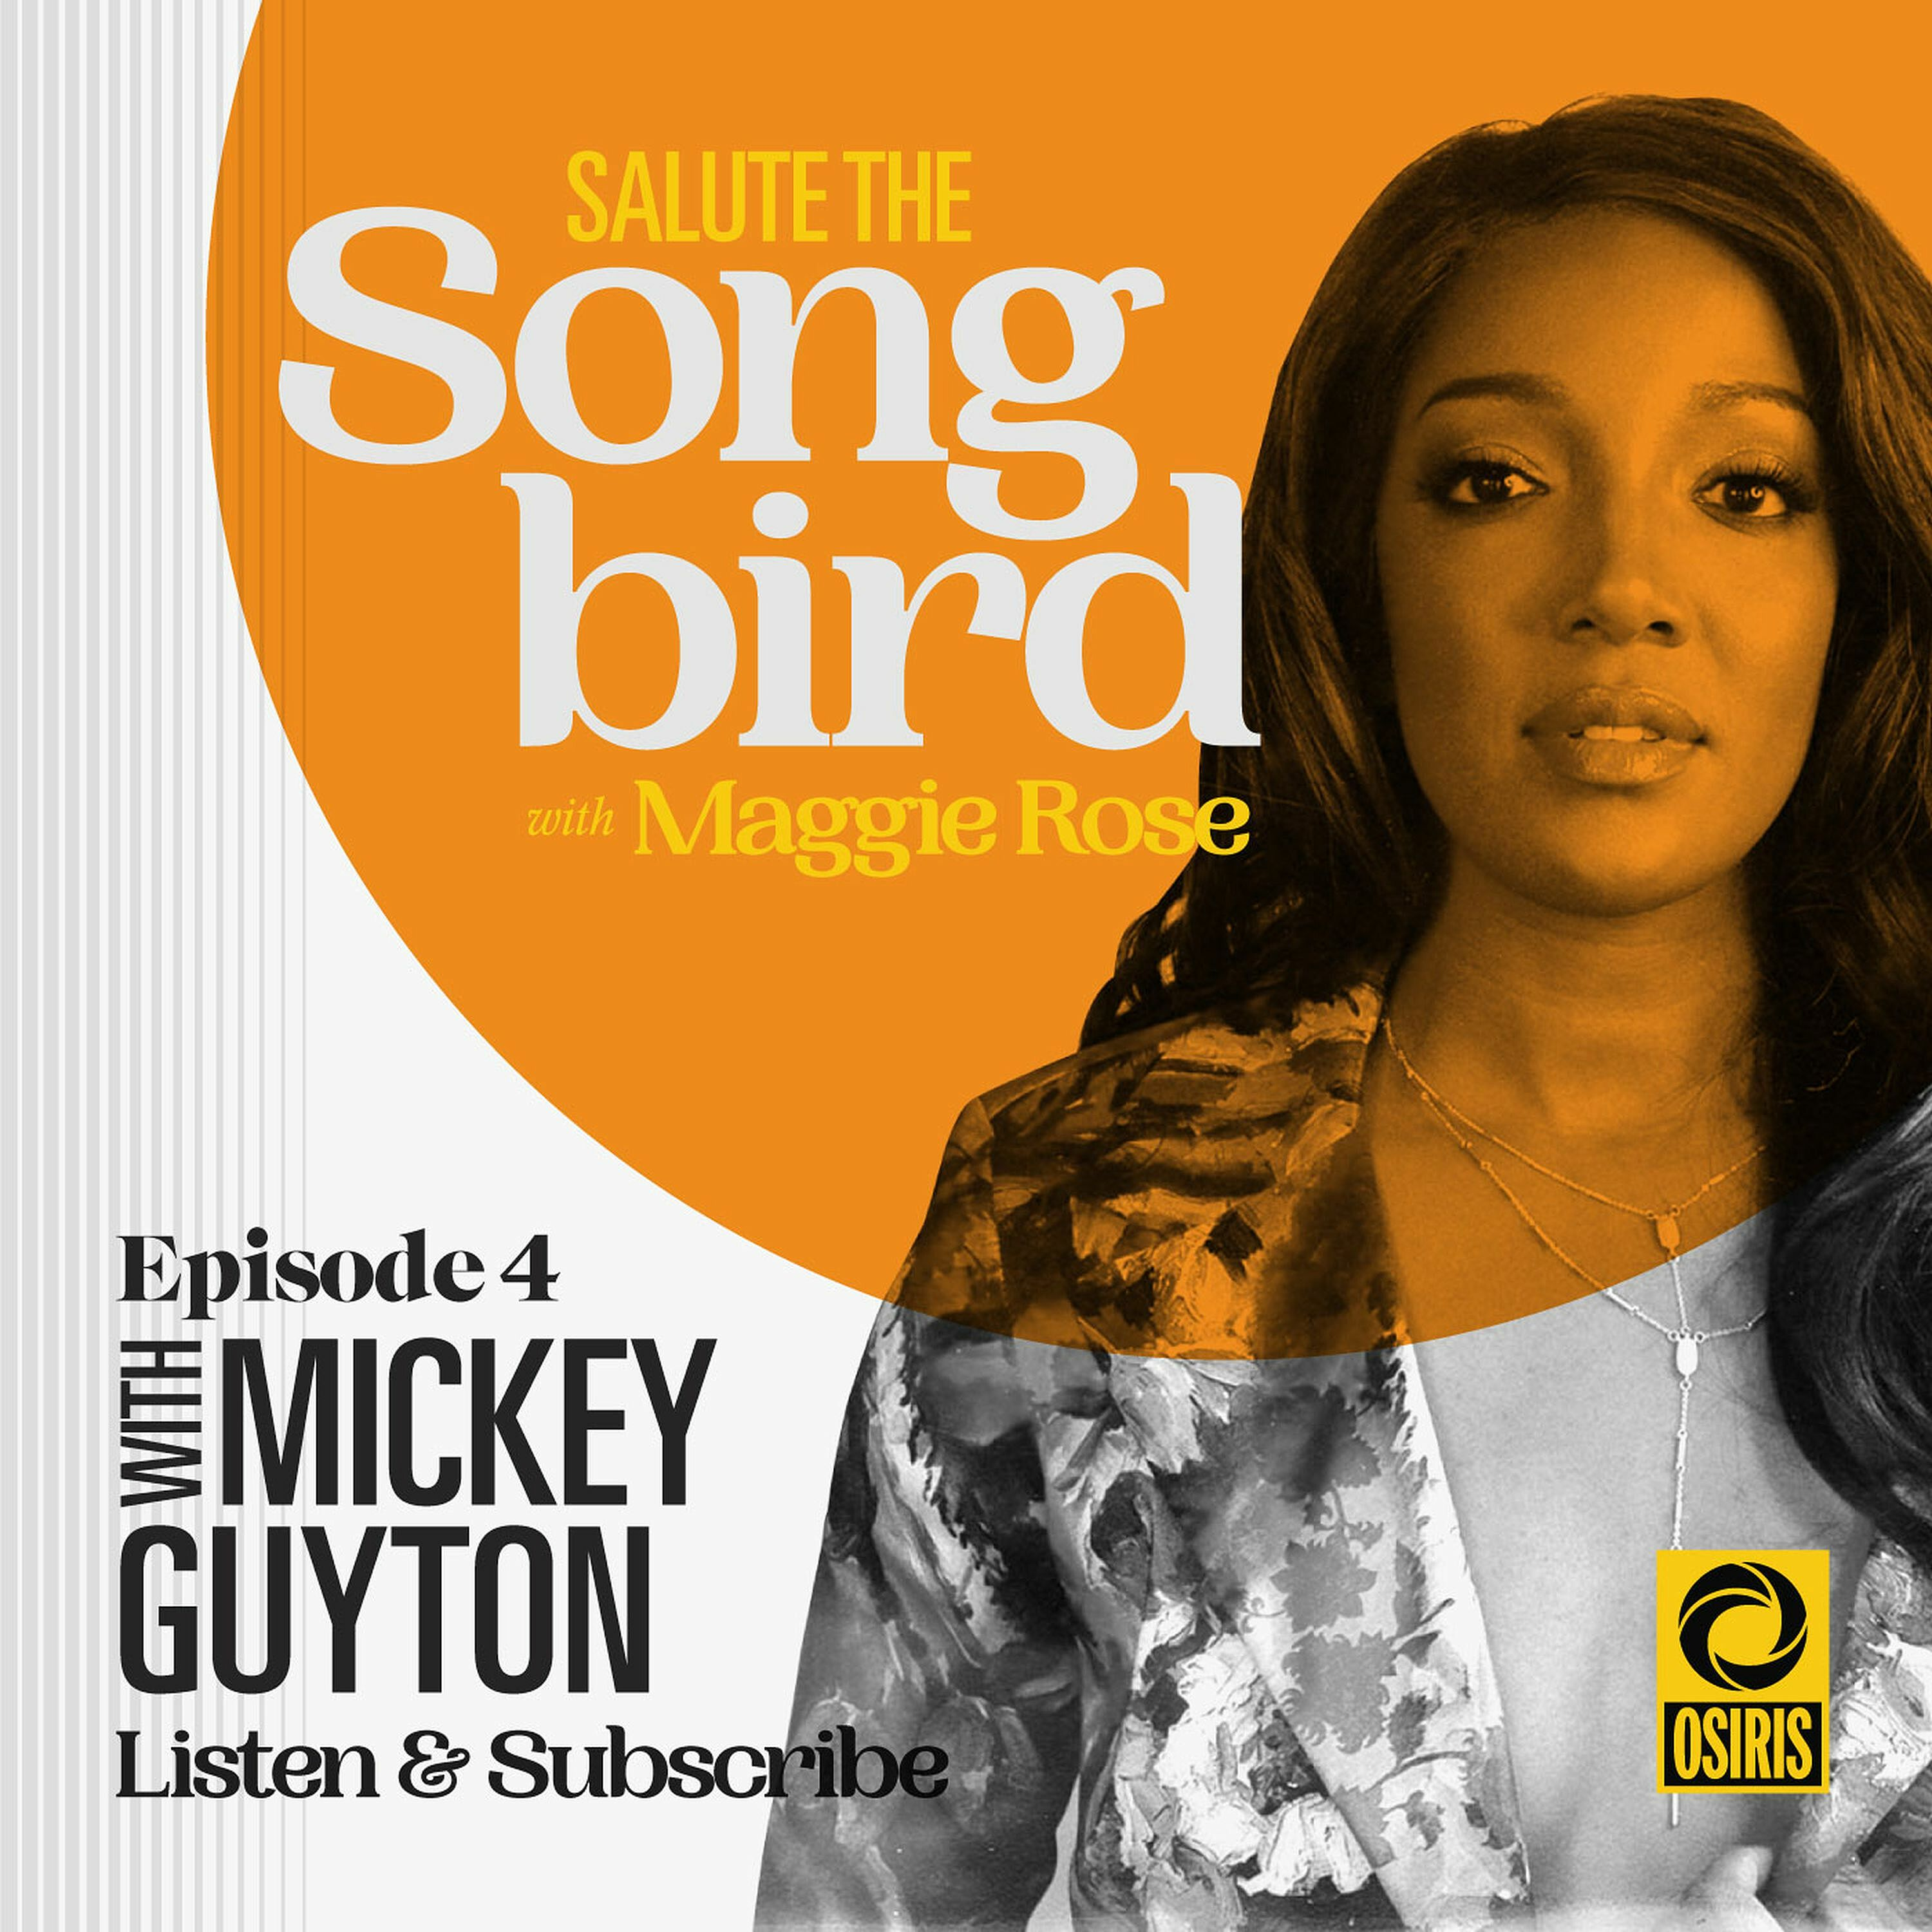 Salute the Songbird with Maggie Rose : Mickey Guyton